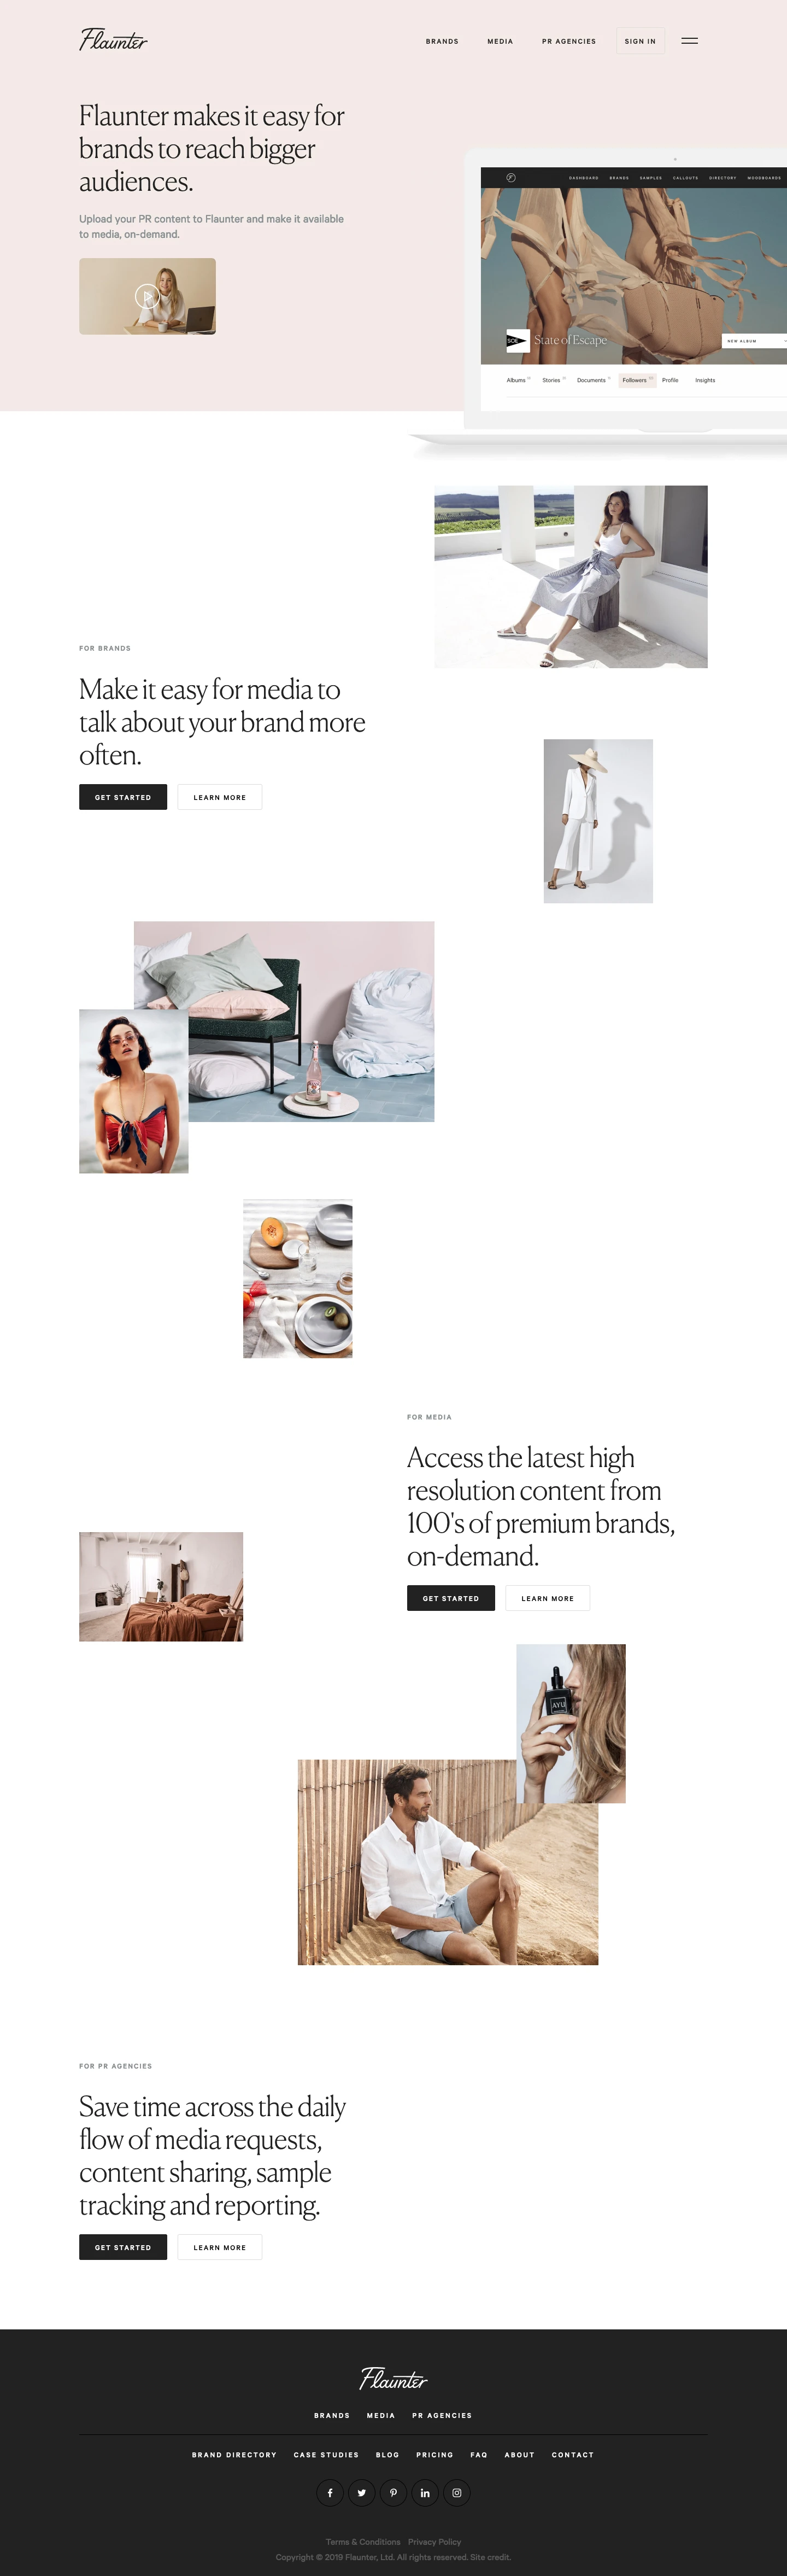 Flaunter Landing Page Example: Flaunter makes it easy for brands to reach bigger audiences. Upload your PR content to Flaunter and make it available to media, on-demand.